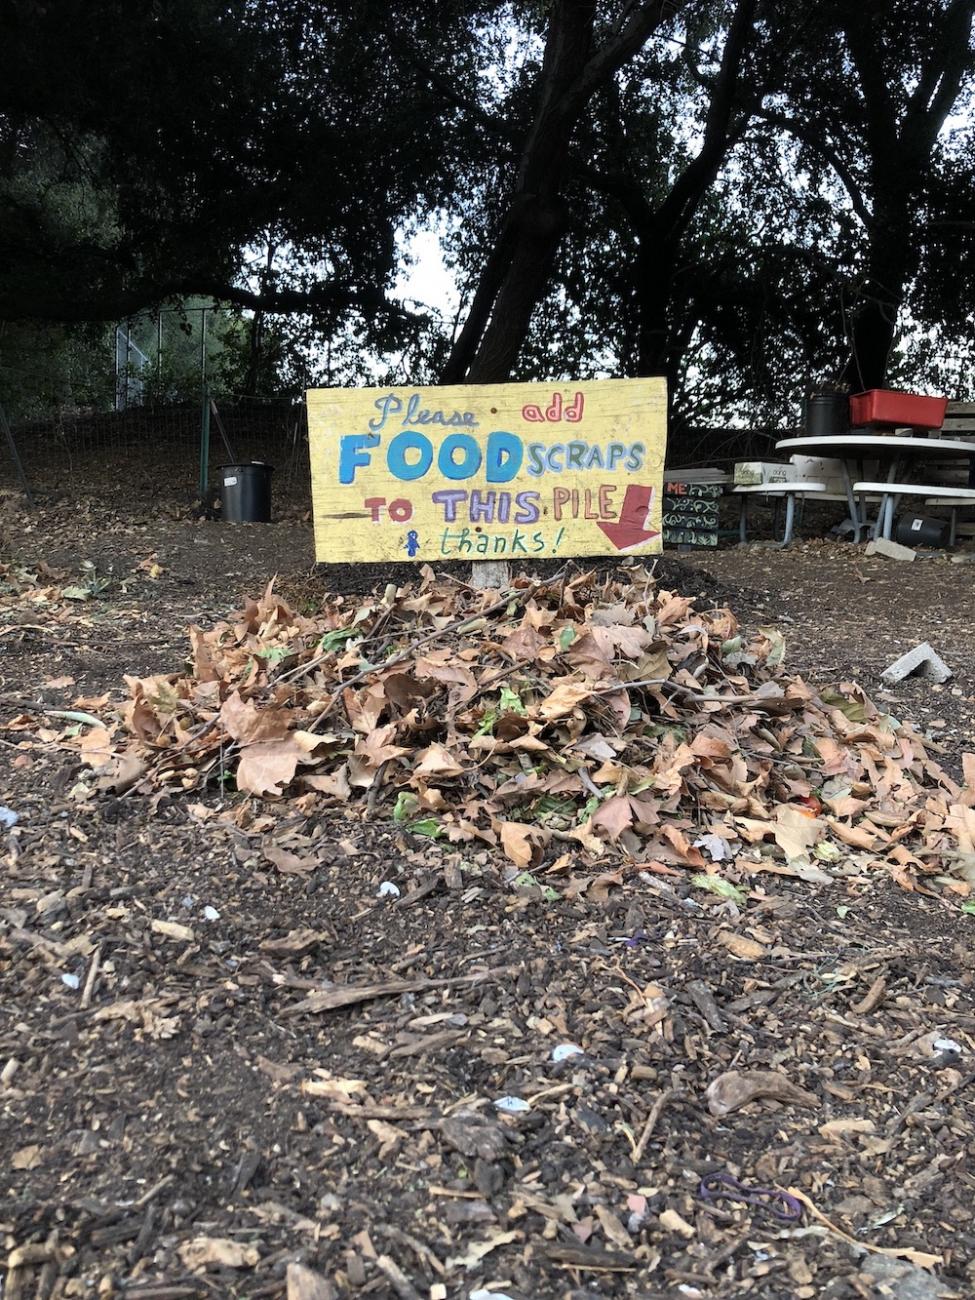 Small compost pile with sign that says "Please add food scraps to this pile"